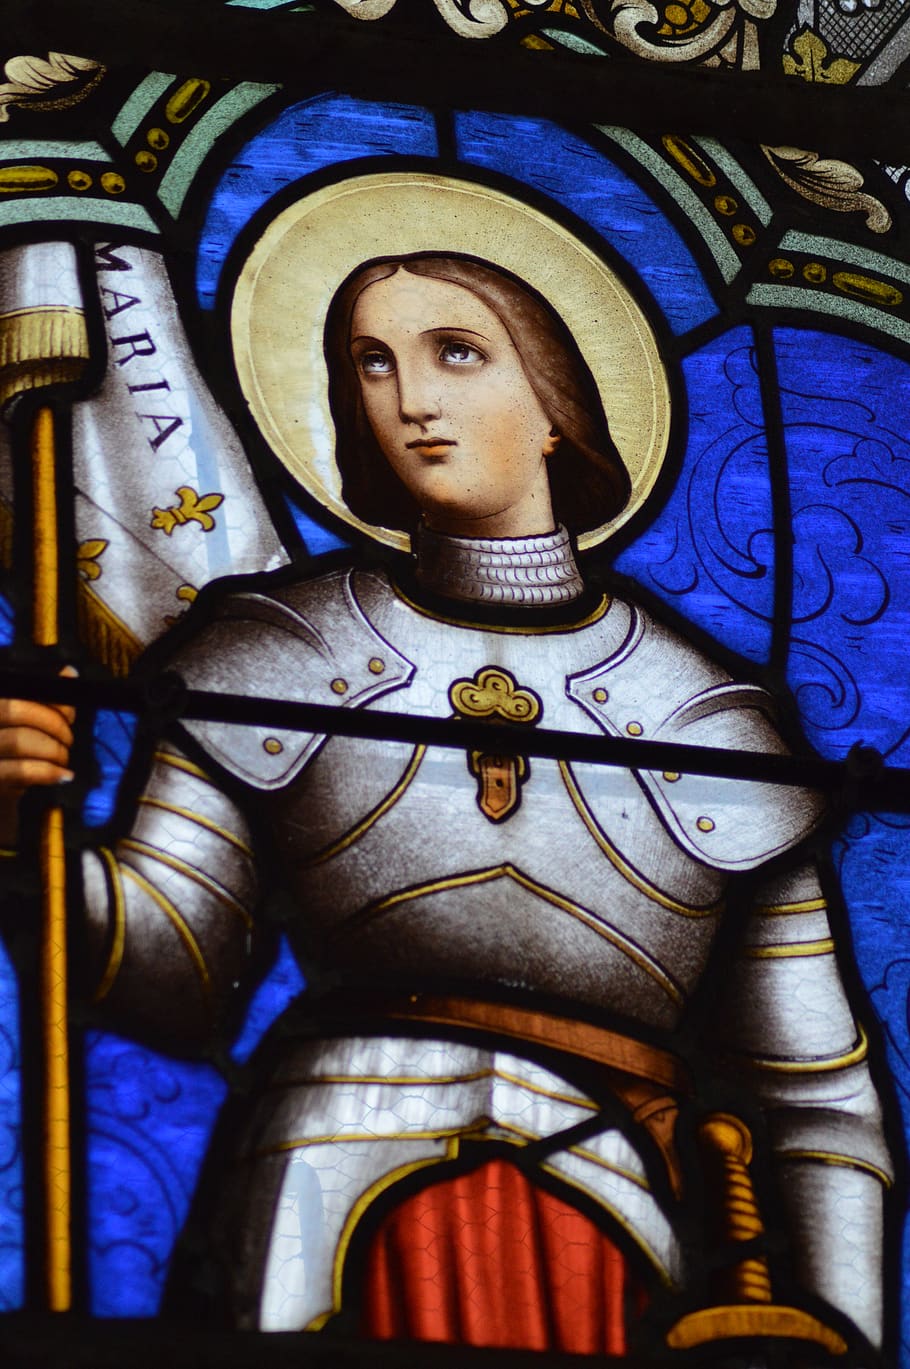 stained glass, colorful, chapel, window, young, girl, armor, warrior, halo, flag